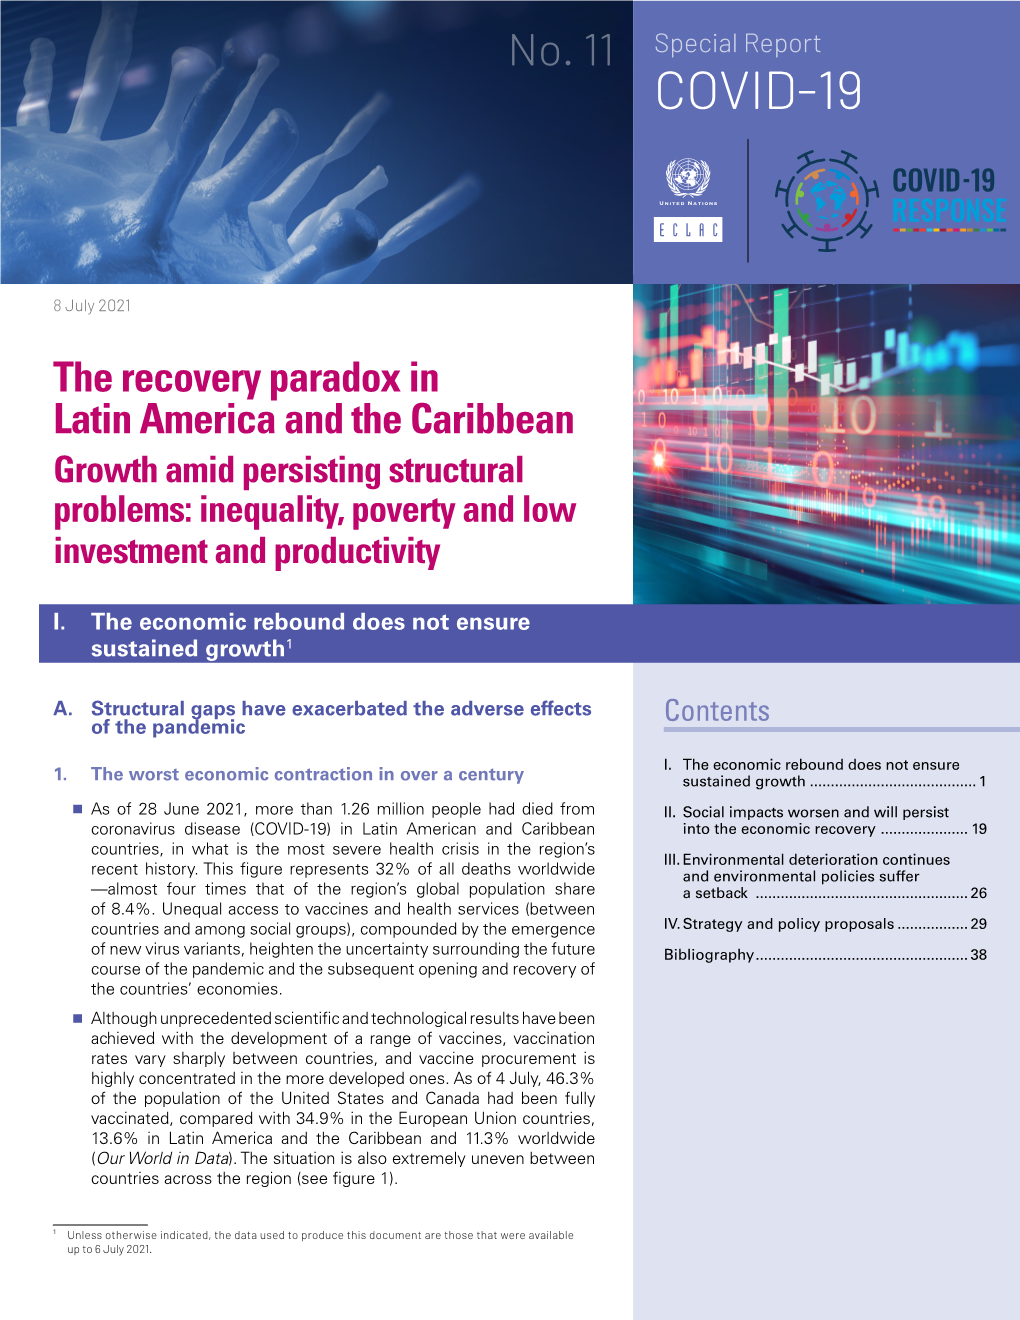 The Recovery Paradox in Latin America and the Caribbean Growth Amid Persisting Structural Problems: Inequality, Poverty and Low Investment and Productivity